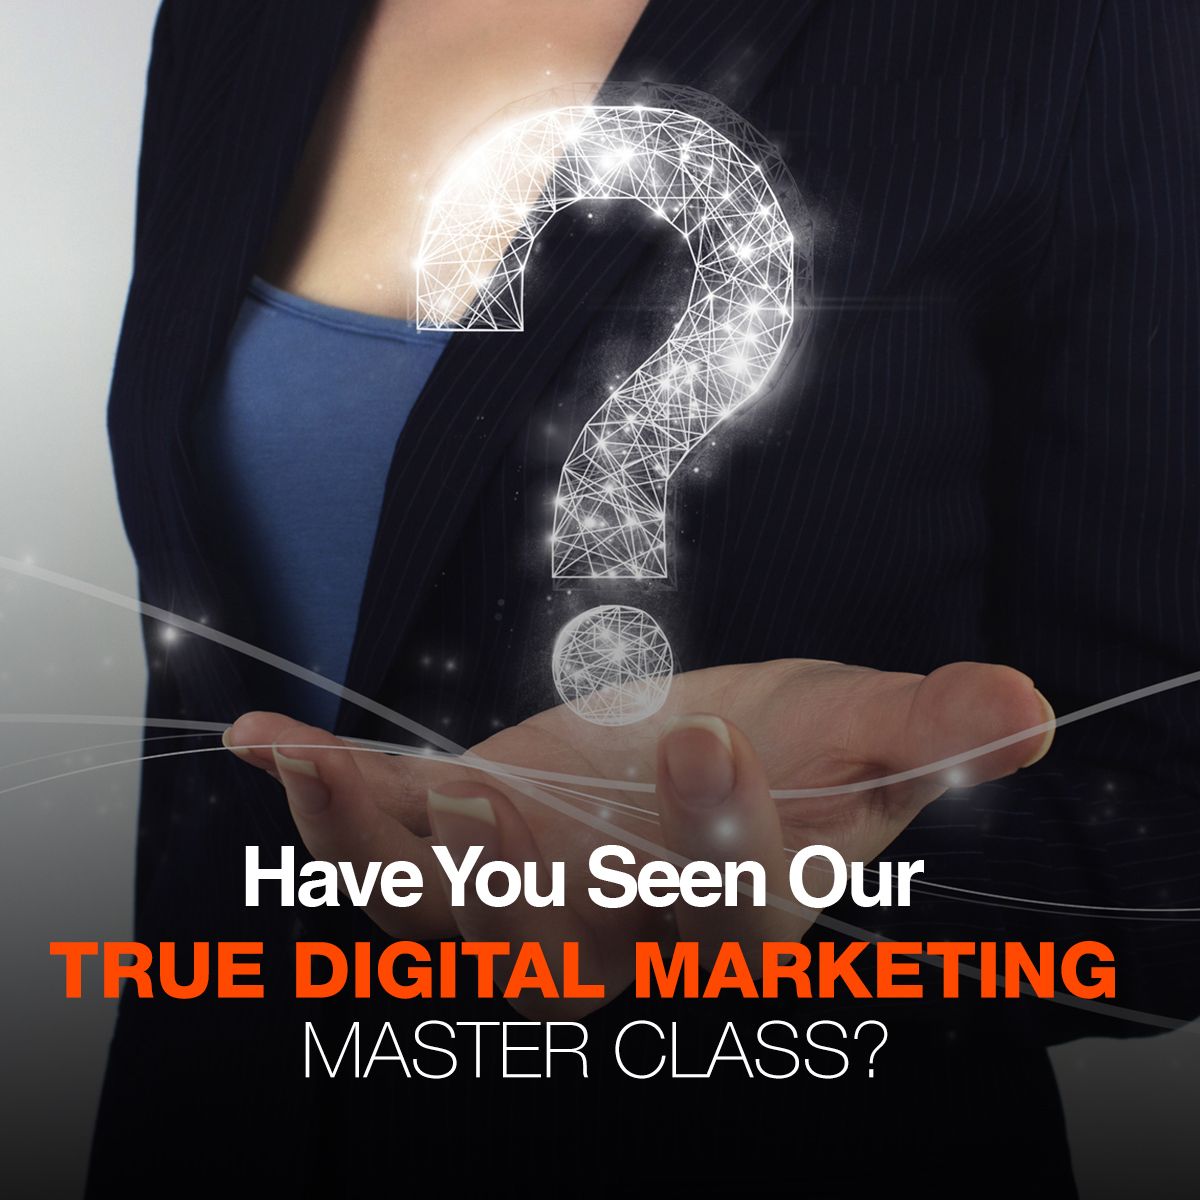 Have You Seen Our True Digital Marketing Master Class?